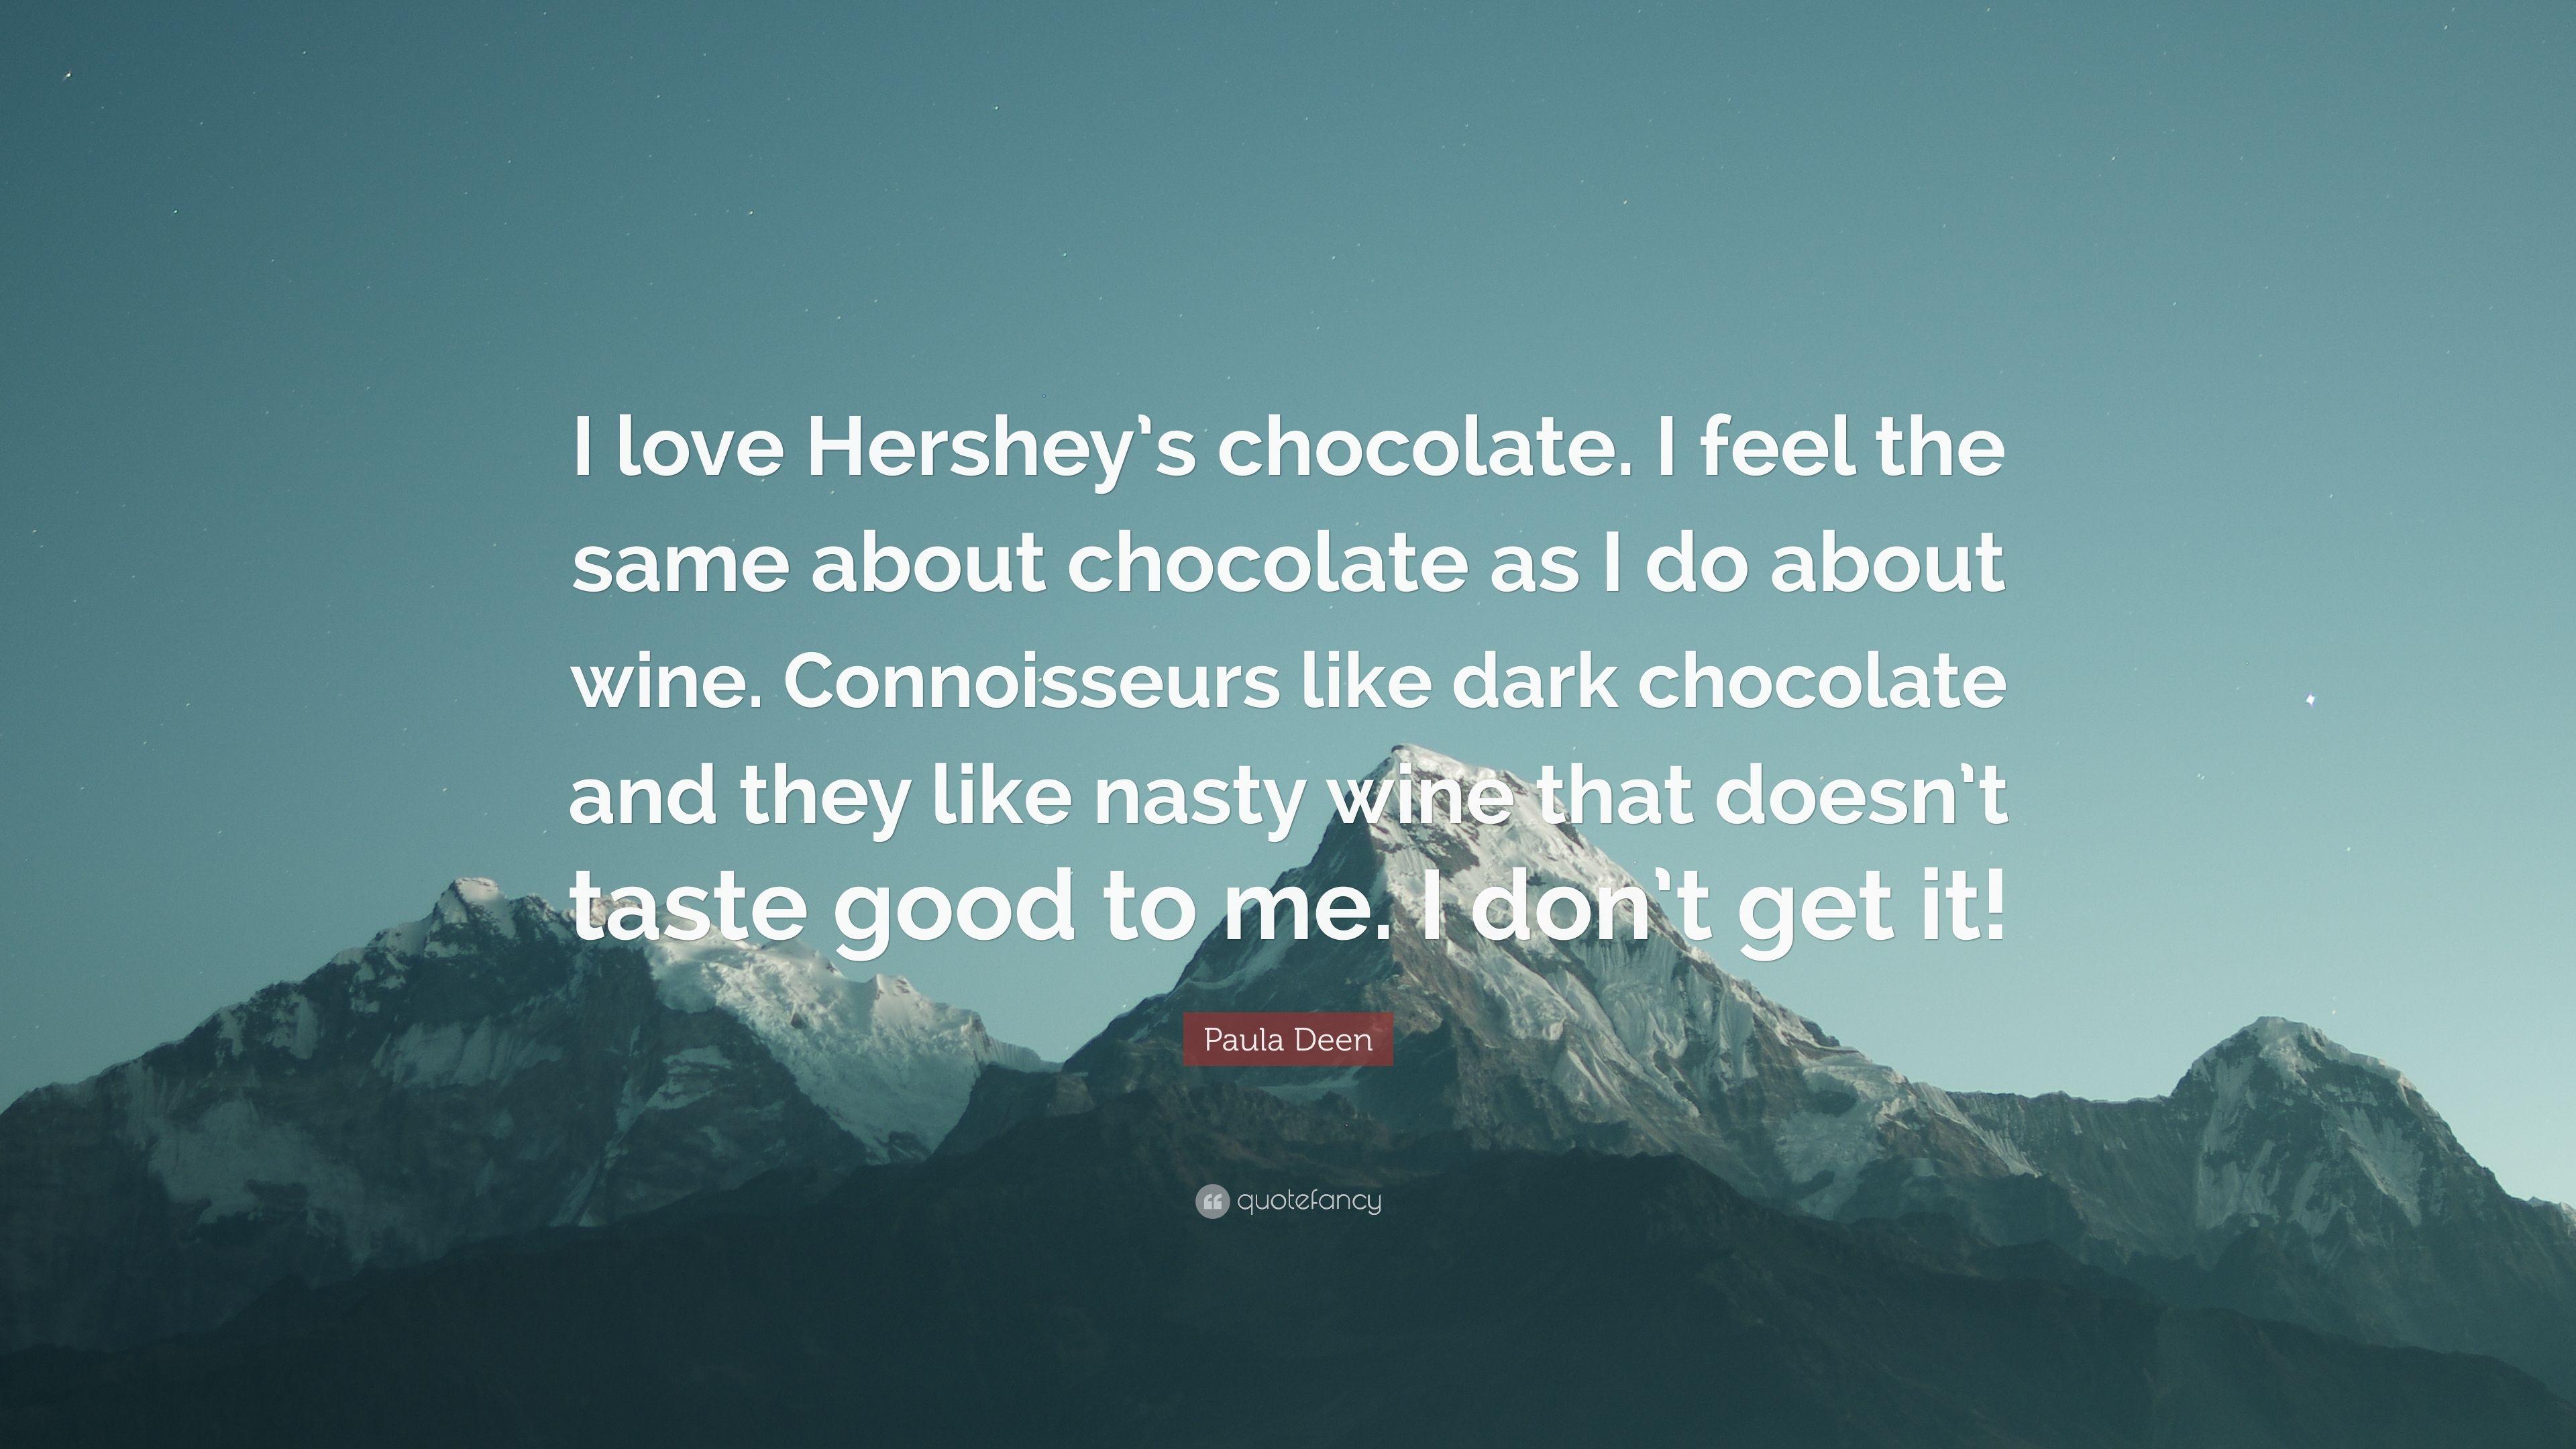 Paula Deen Quote: “I love Hershey's chocolate. I feel the same about